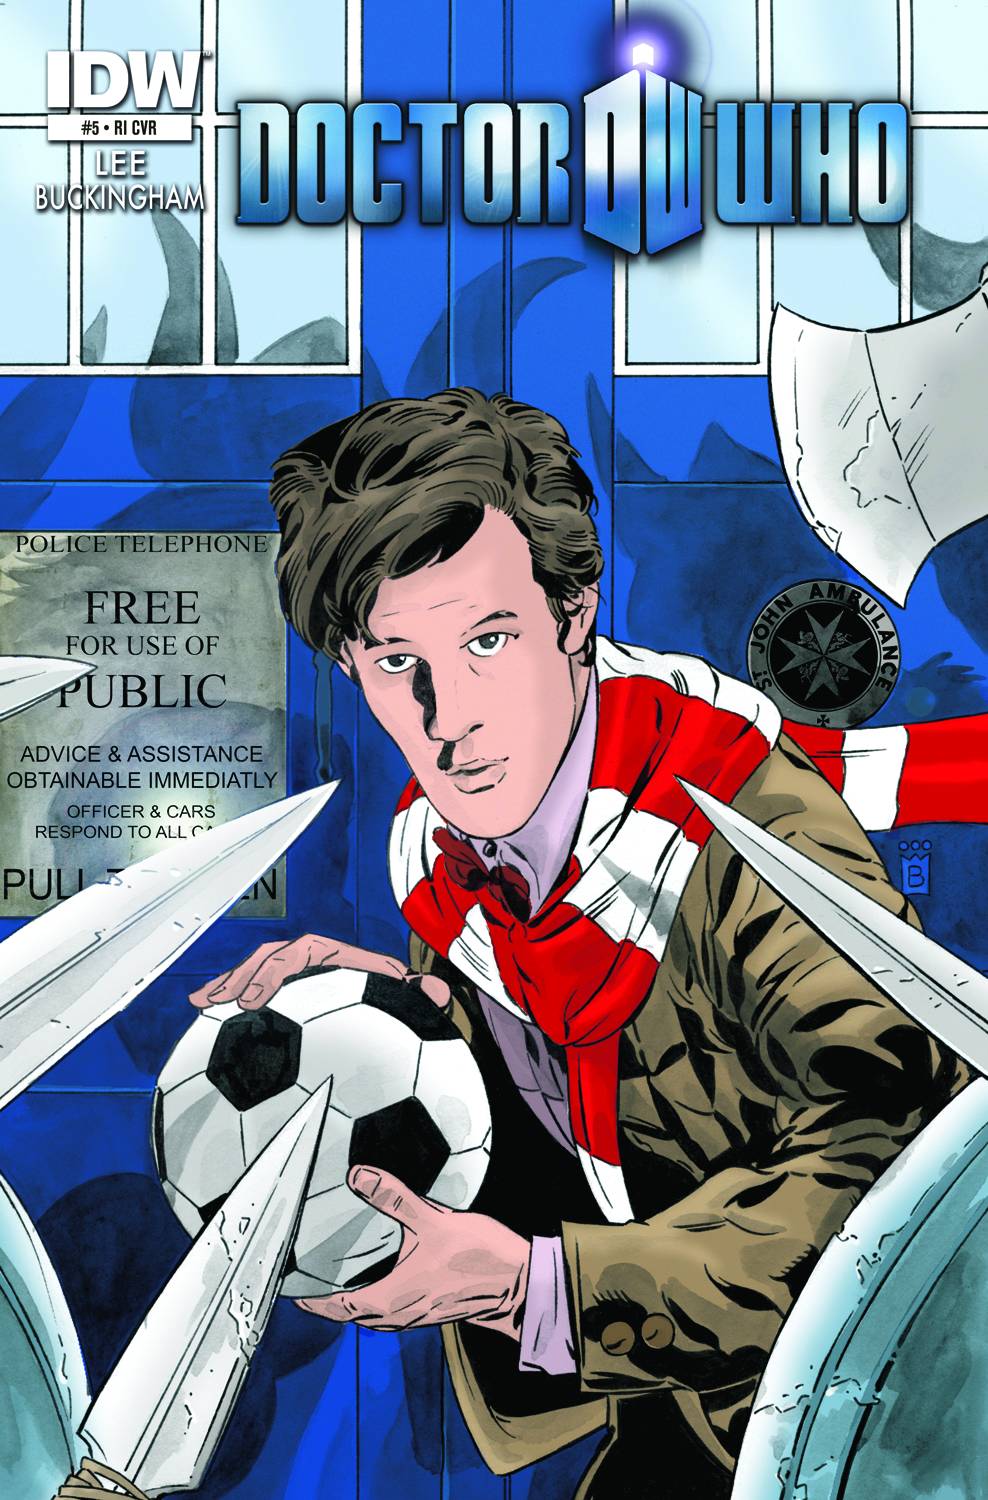 Doctor Who Ongoing Volume 2 #5 1 for 10 Incentive